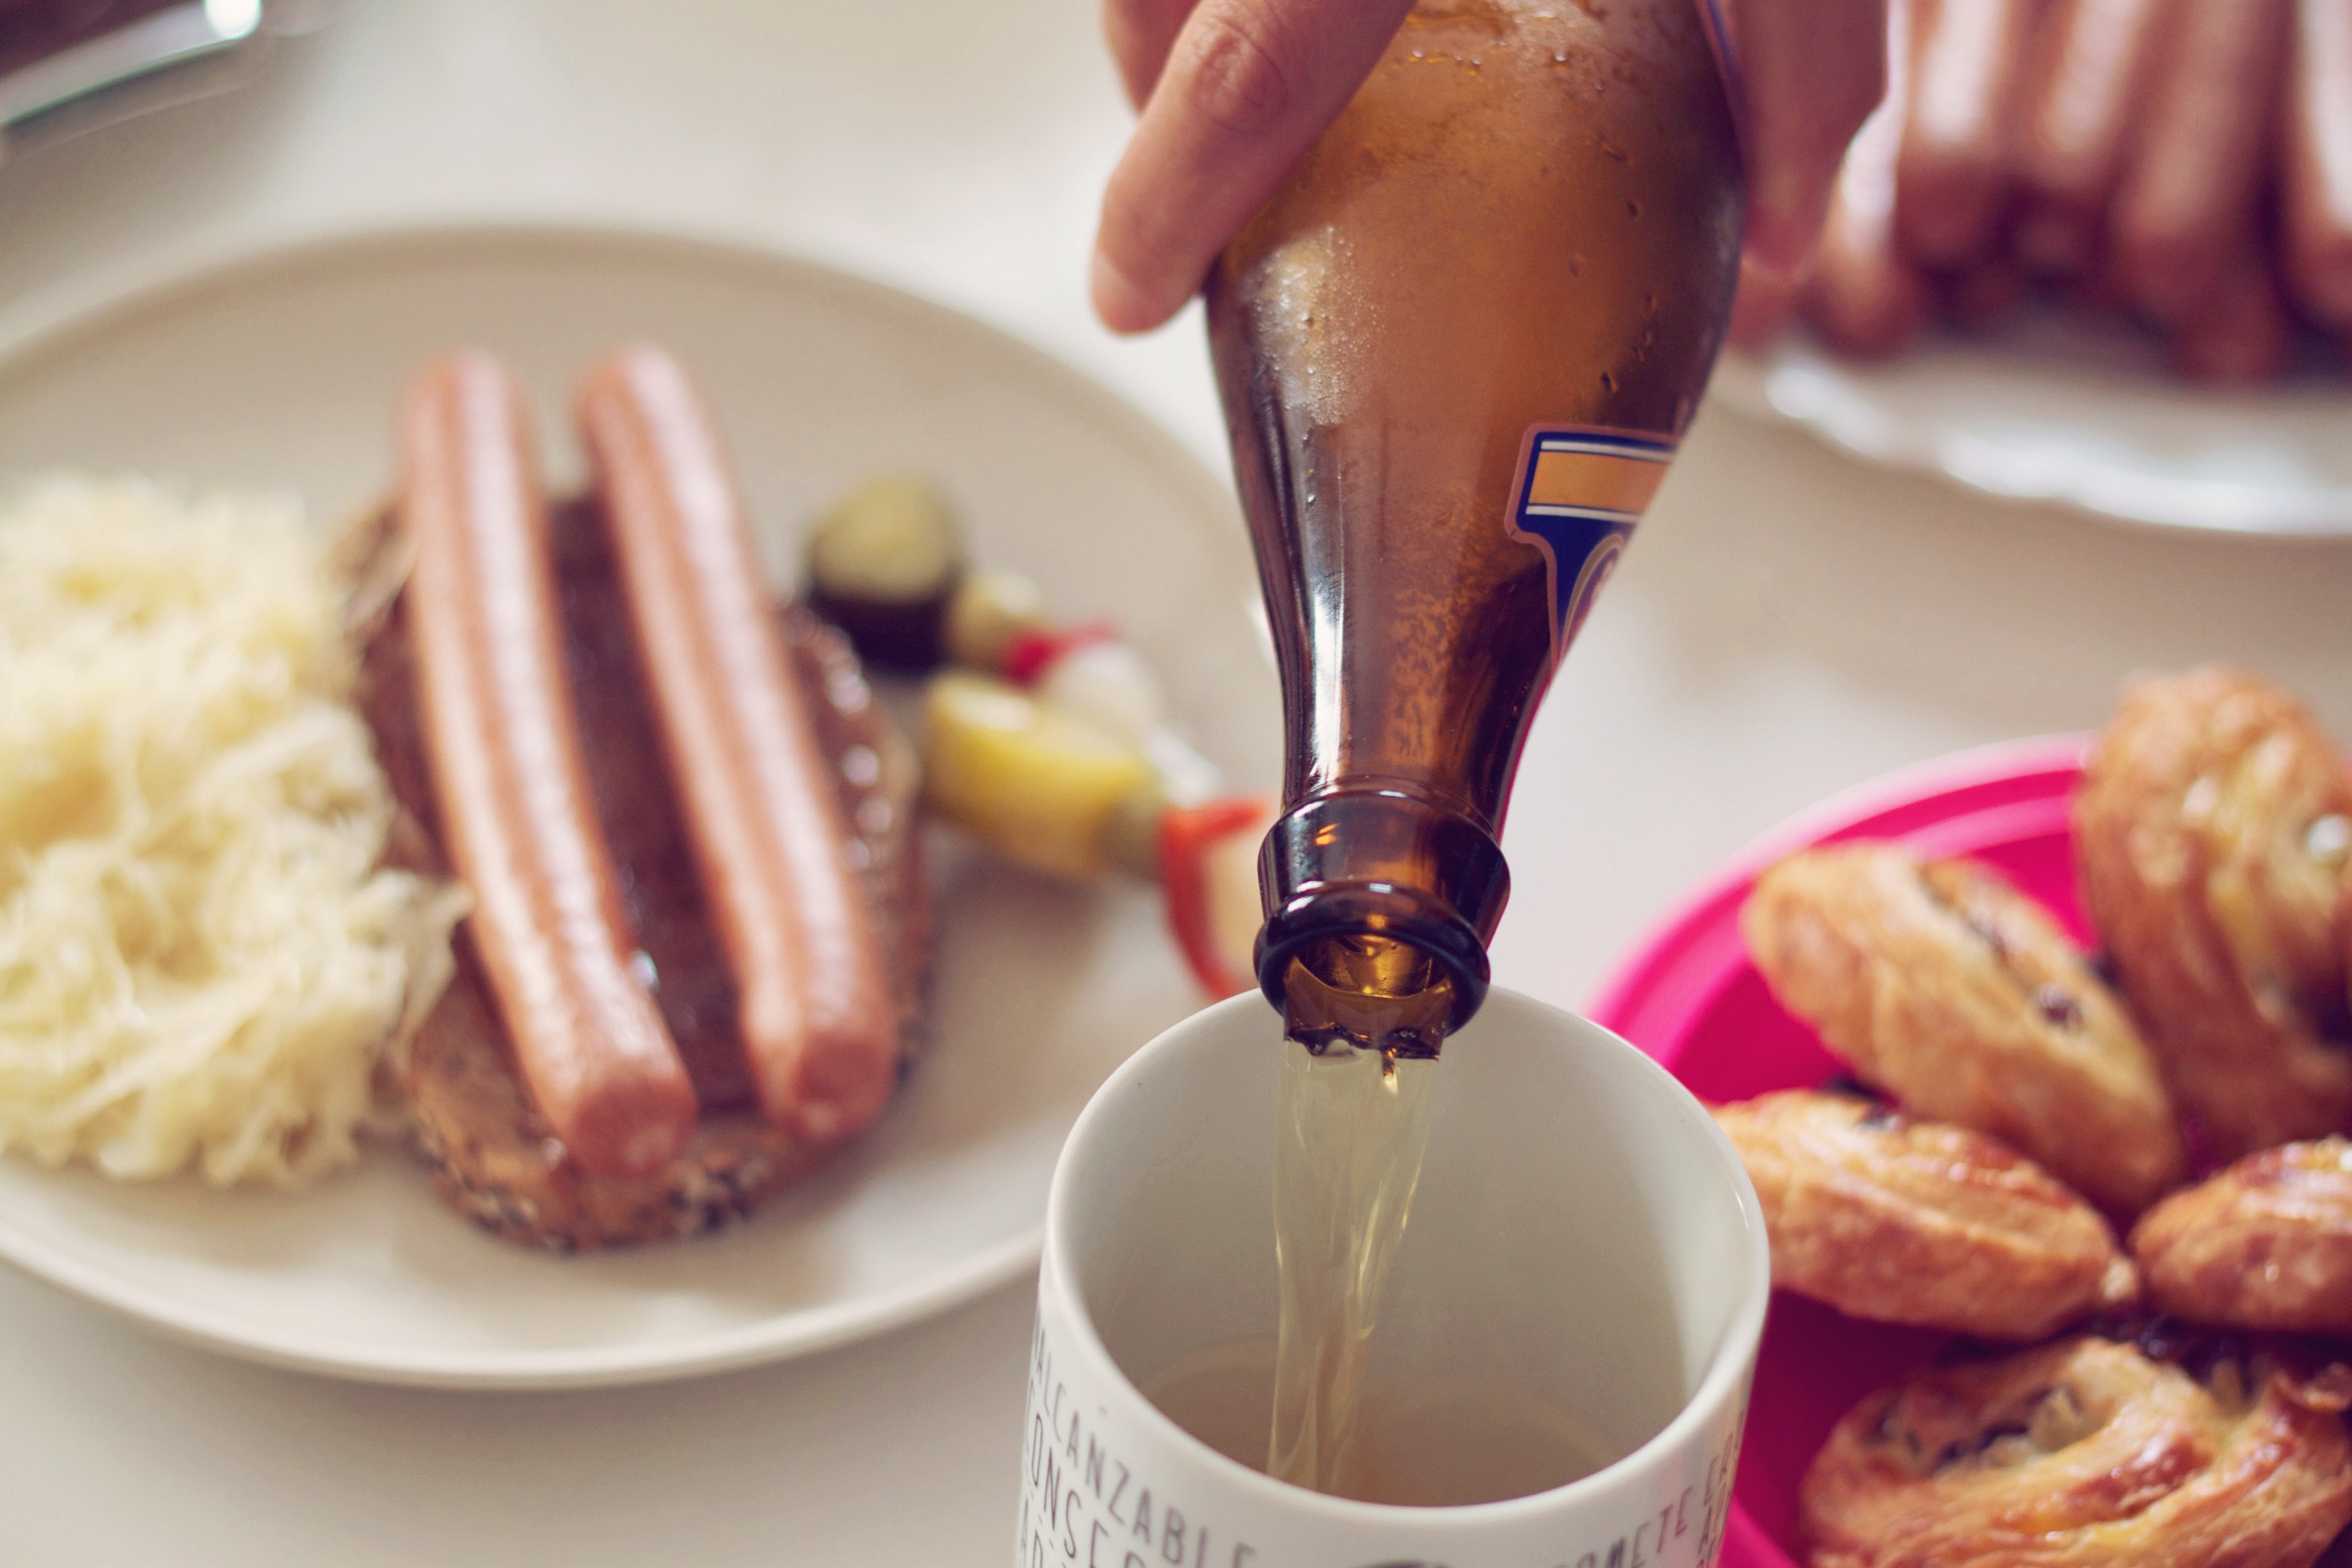 person filling white mug with beer next to sausage dish and brown pastries in plate